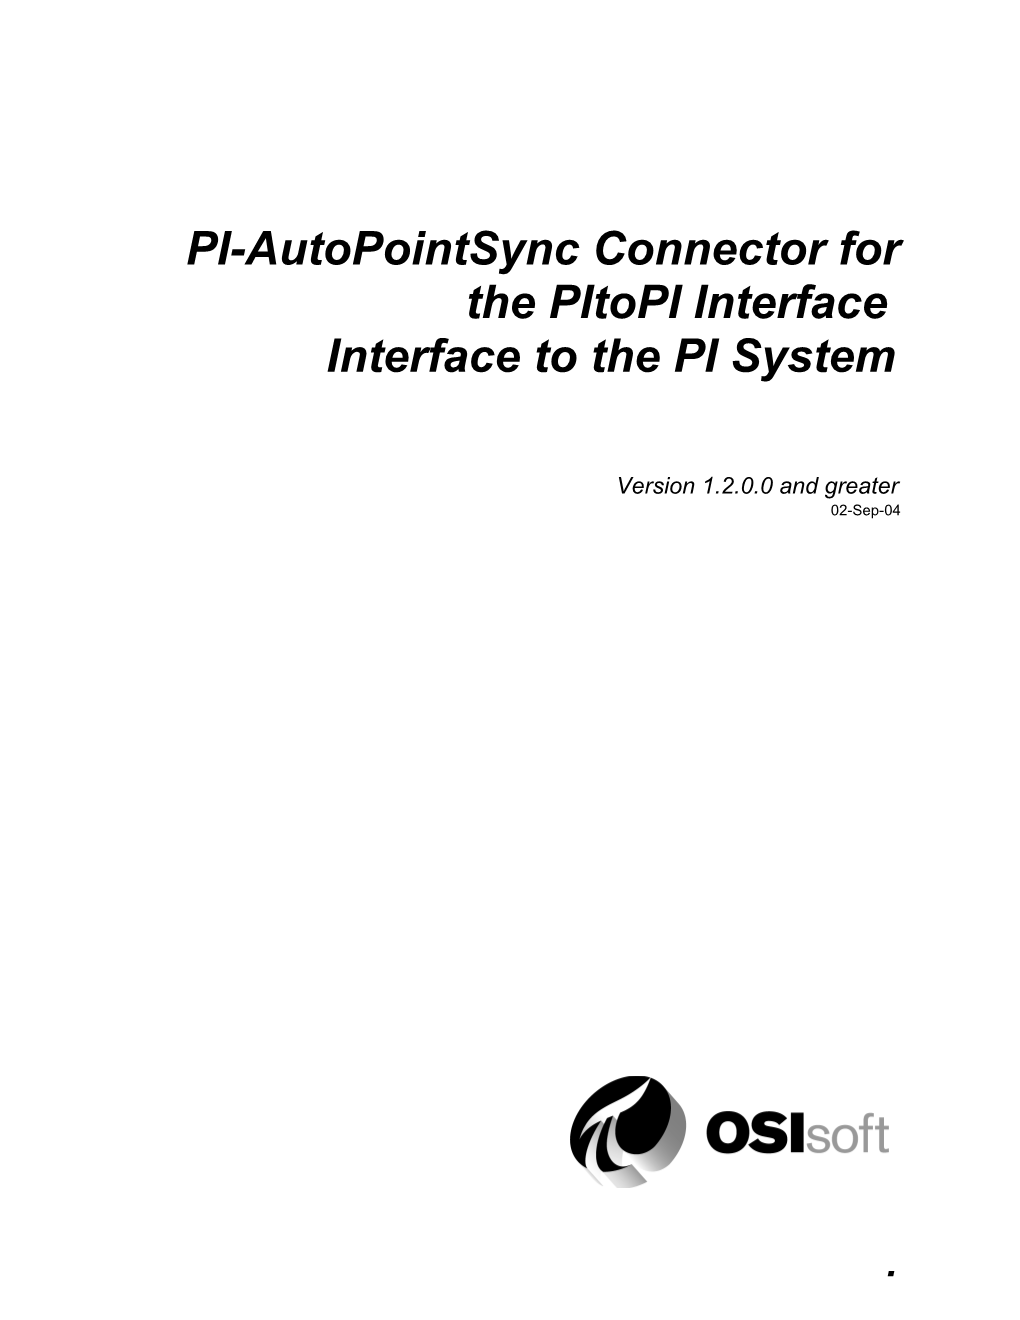 PI-Autopointsync Connector for the Pitopi Interface